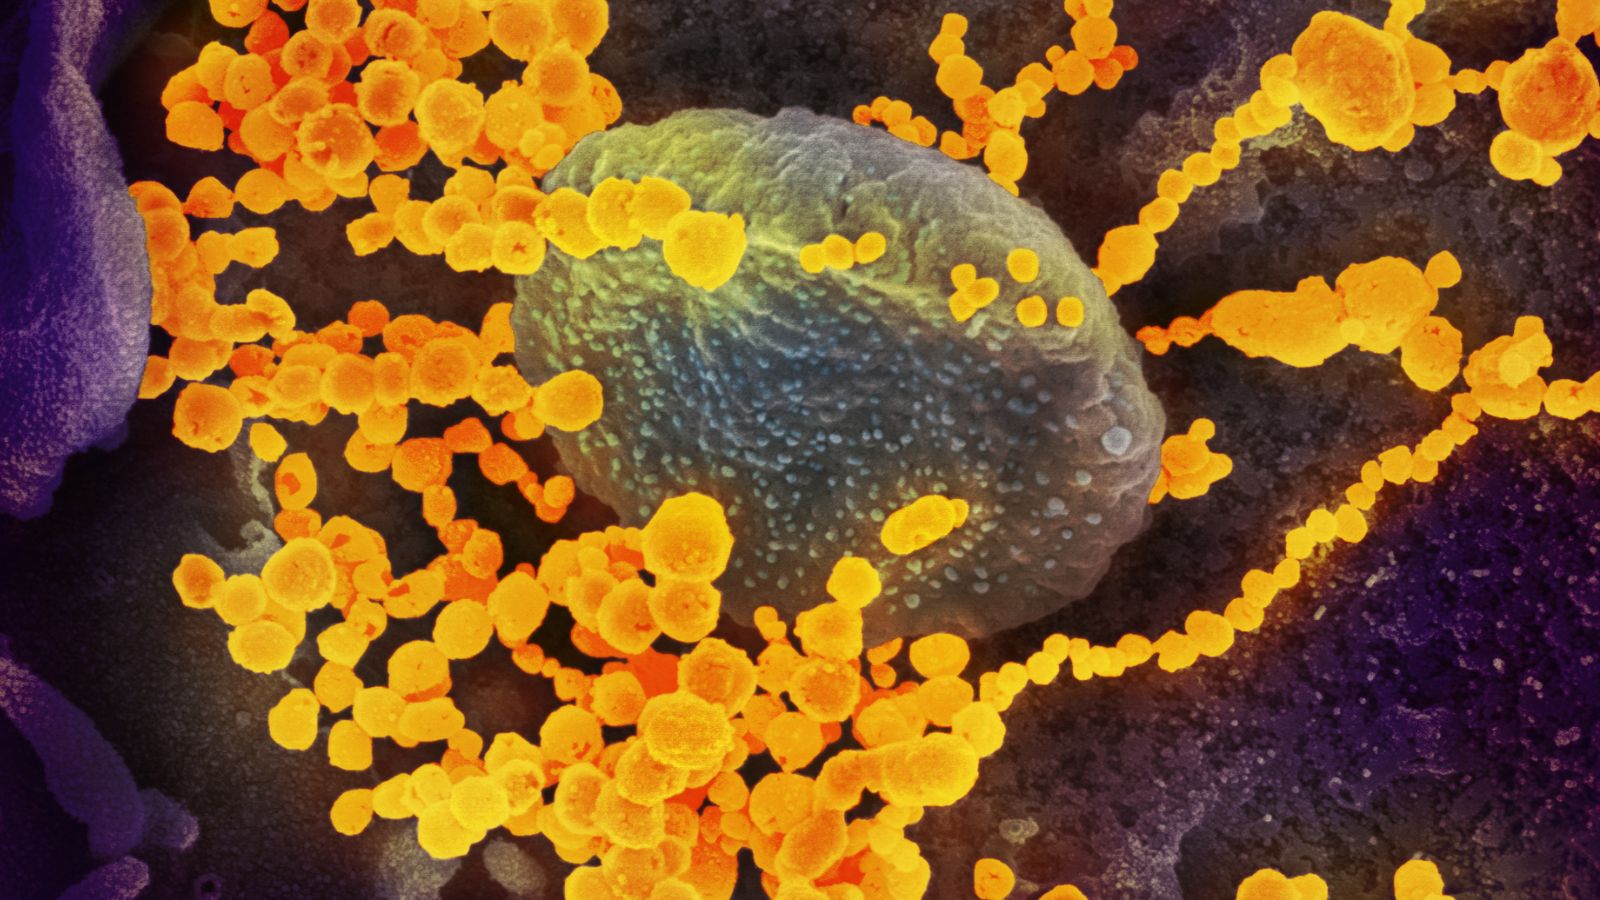 Color photo of an extreme close-up of a virus that looks like a greyish-green ovoid, surrounded by chains of bright orange globules, all in a dark purple environment.